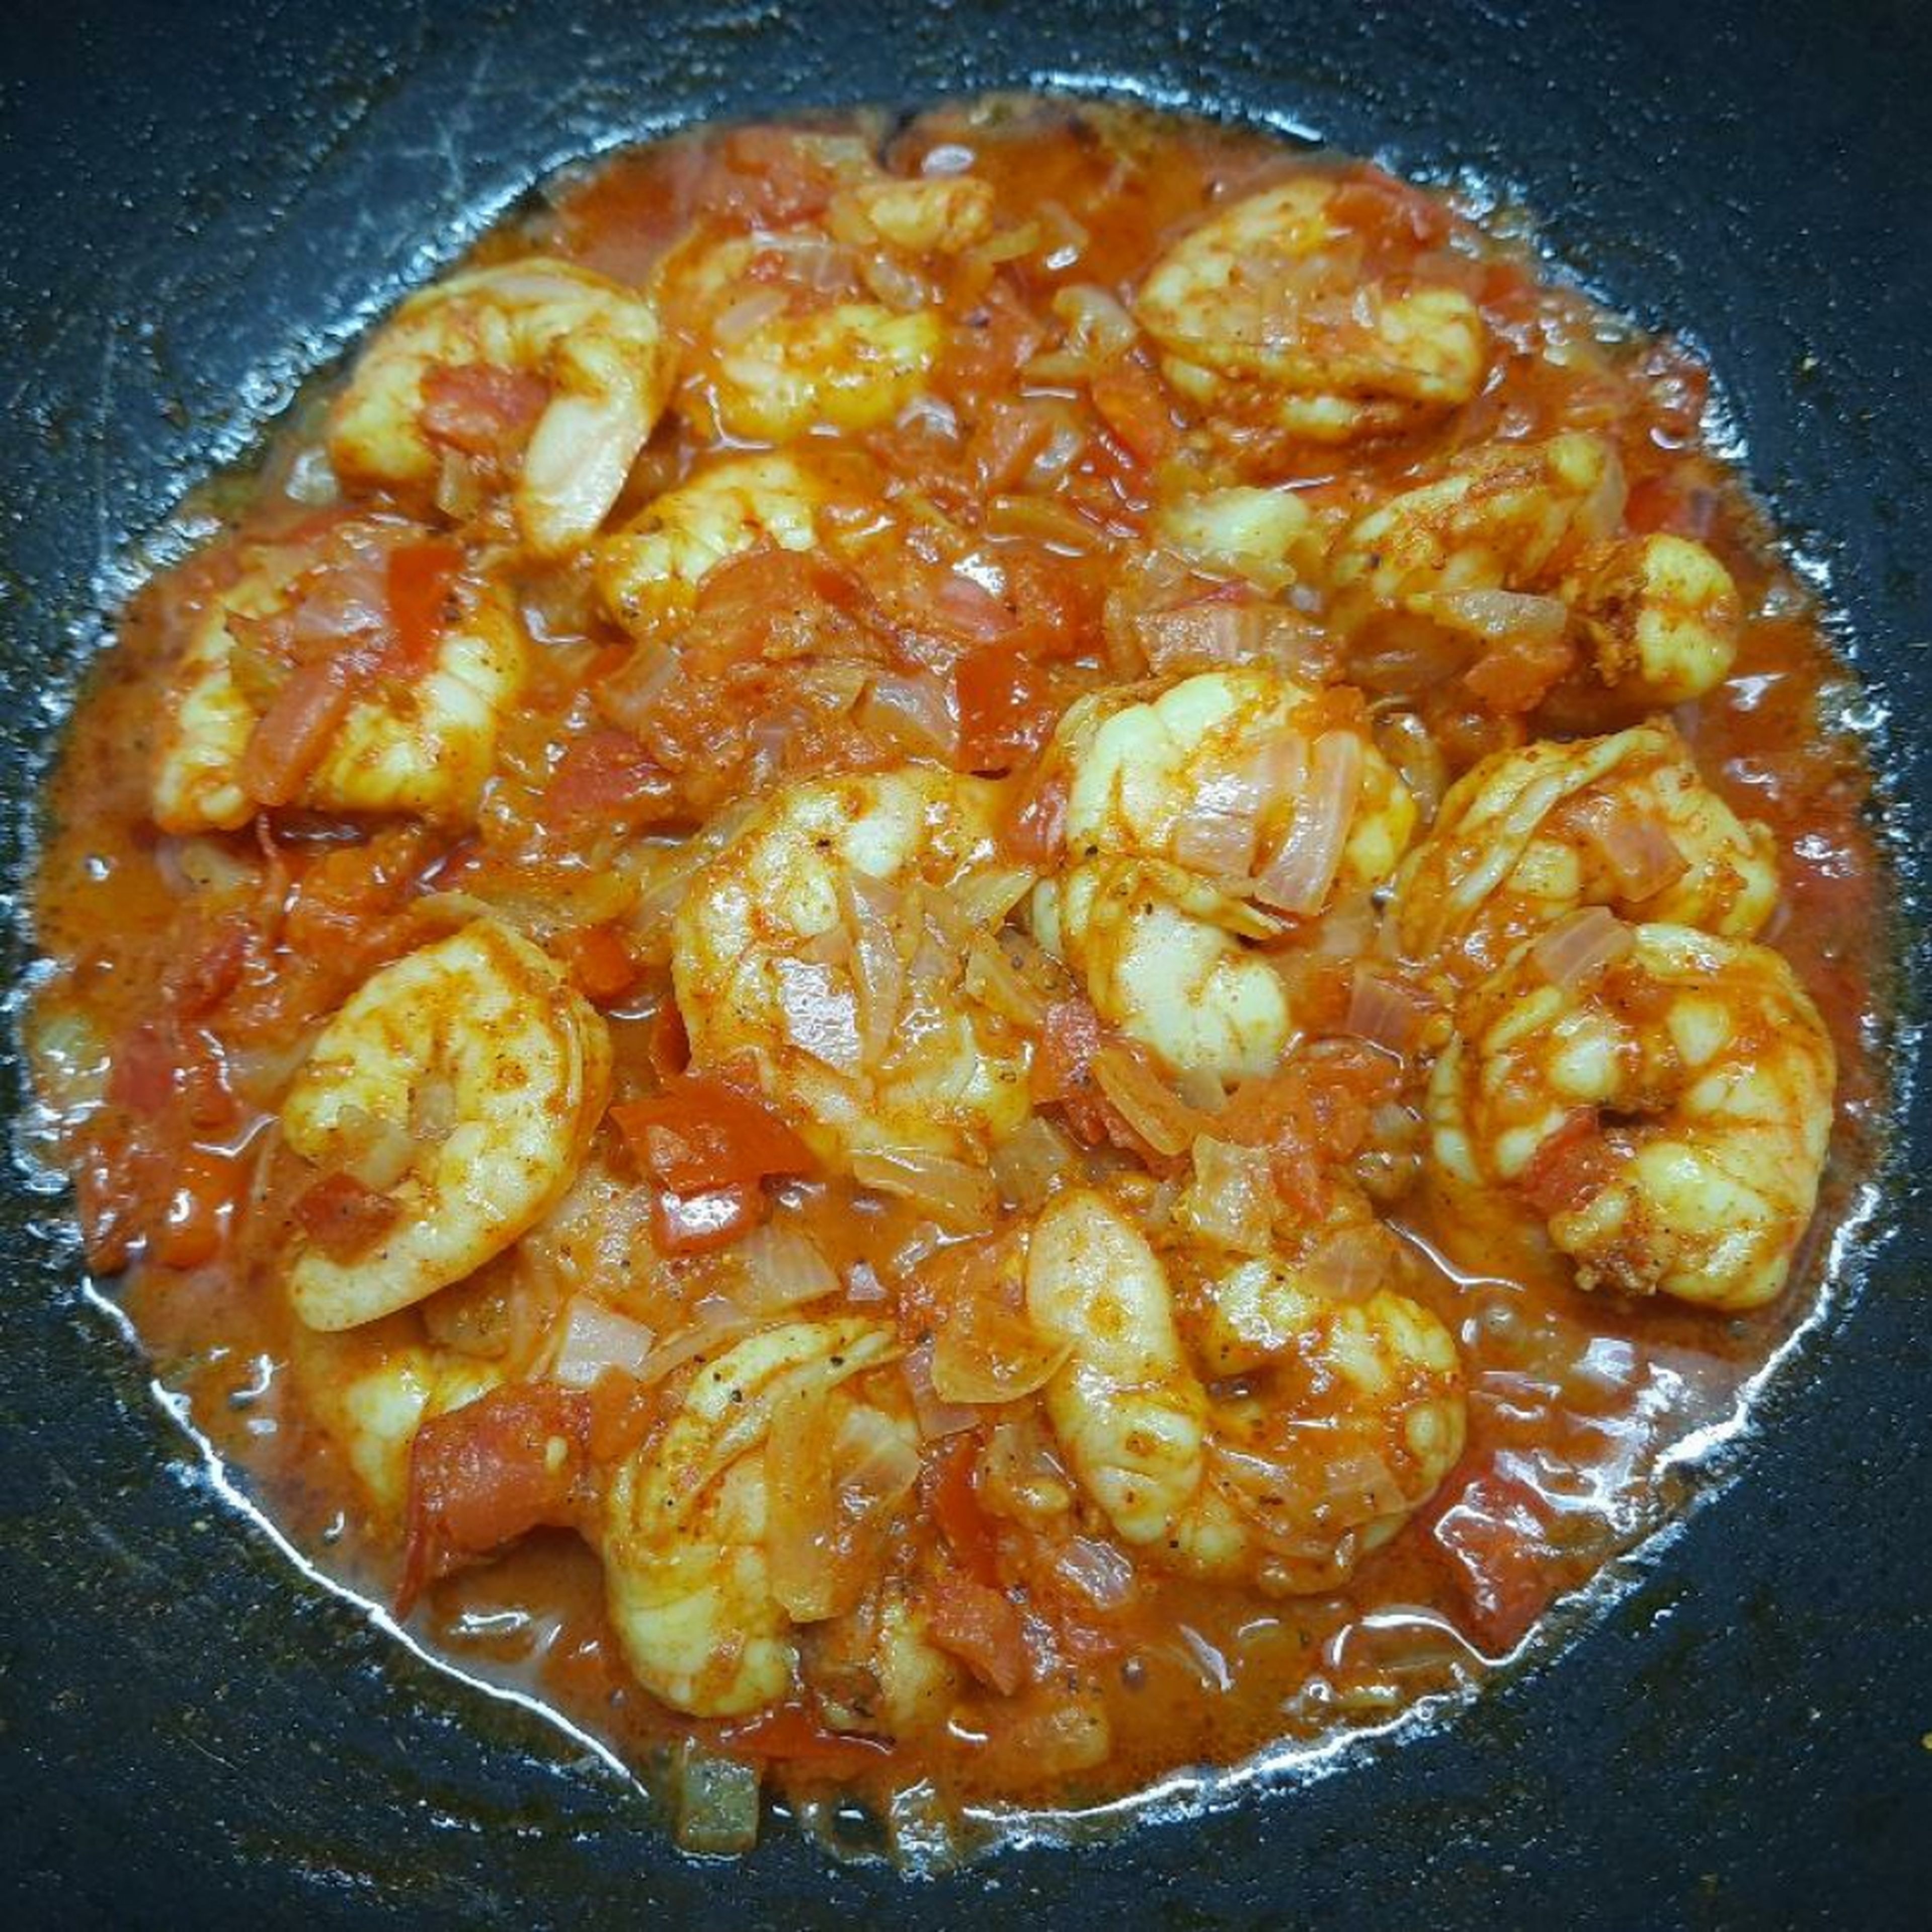 Now add the prawns and stir to mix well. Close the lid and let it cook in low flame for 5mins. When you open the lid, you should see some more water, which comes from our prawns. Mix well again.